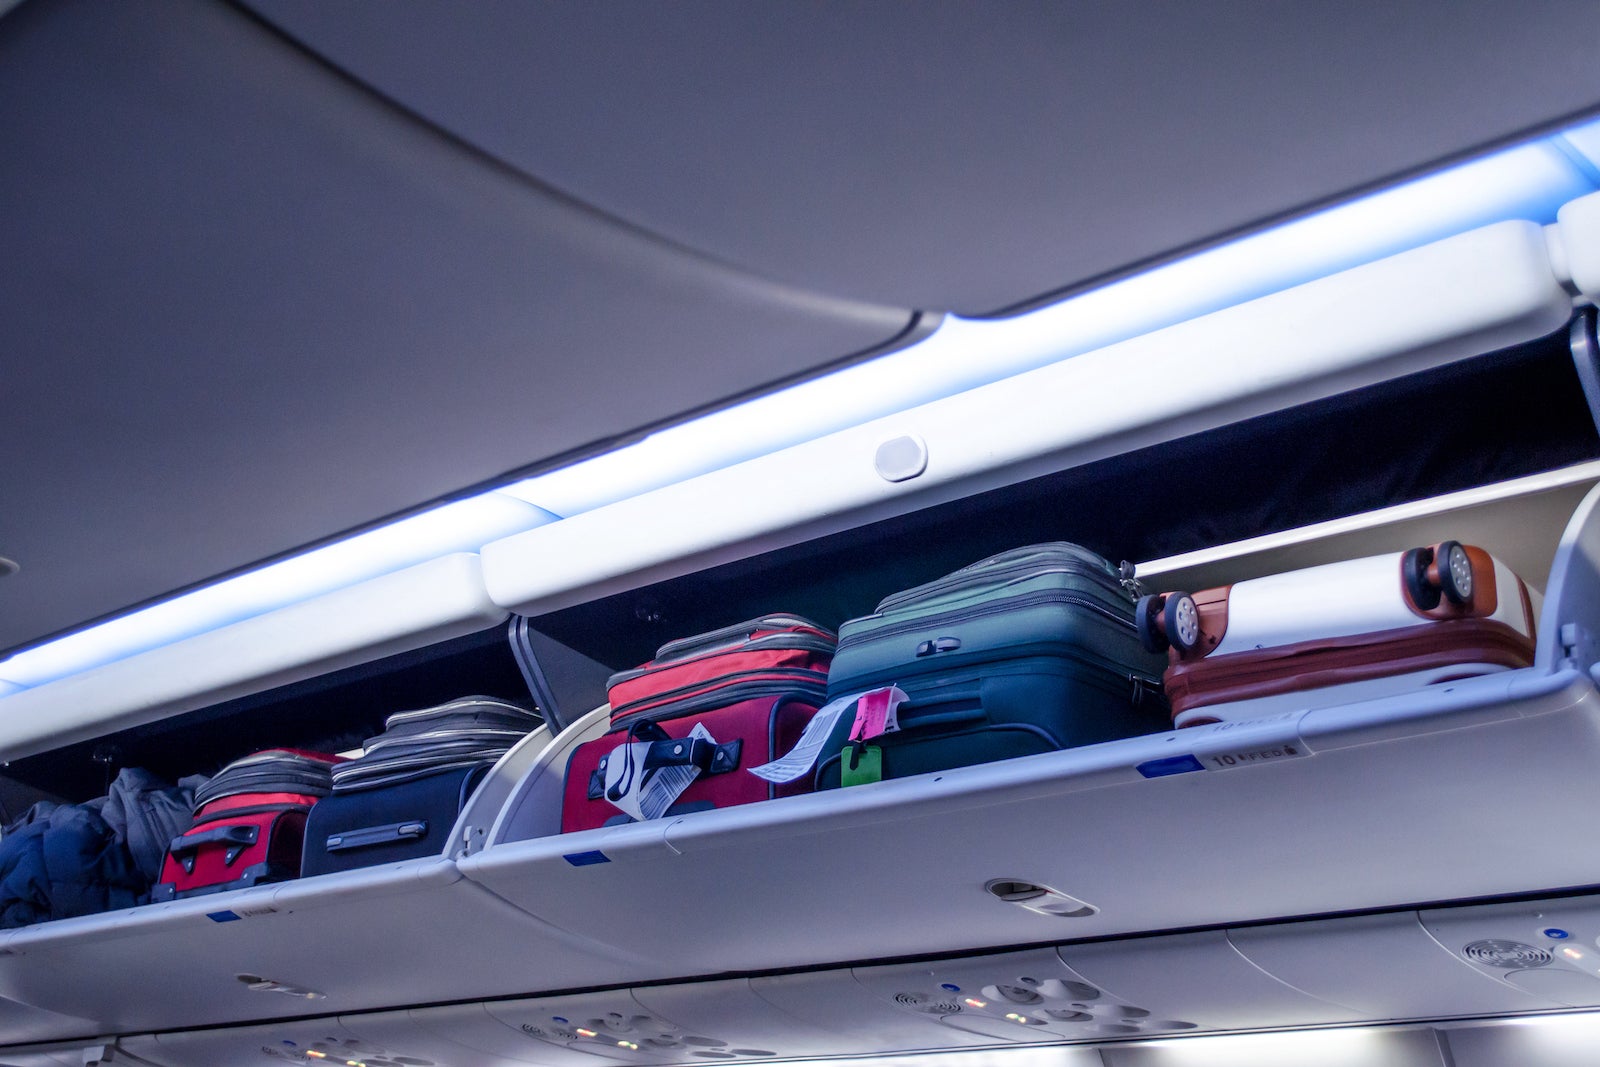 Airline Carry-on Luggage Size: Everything You Need to Know - The